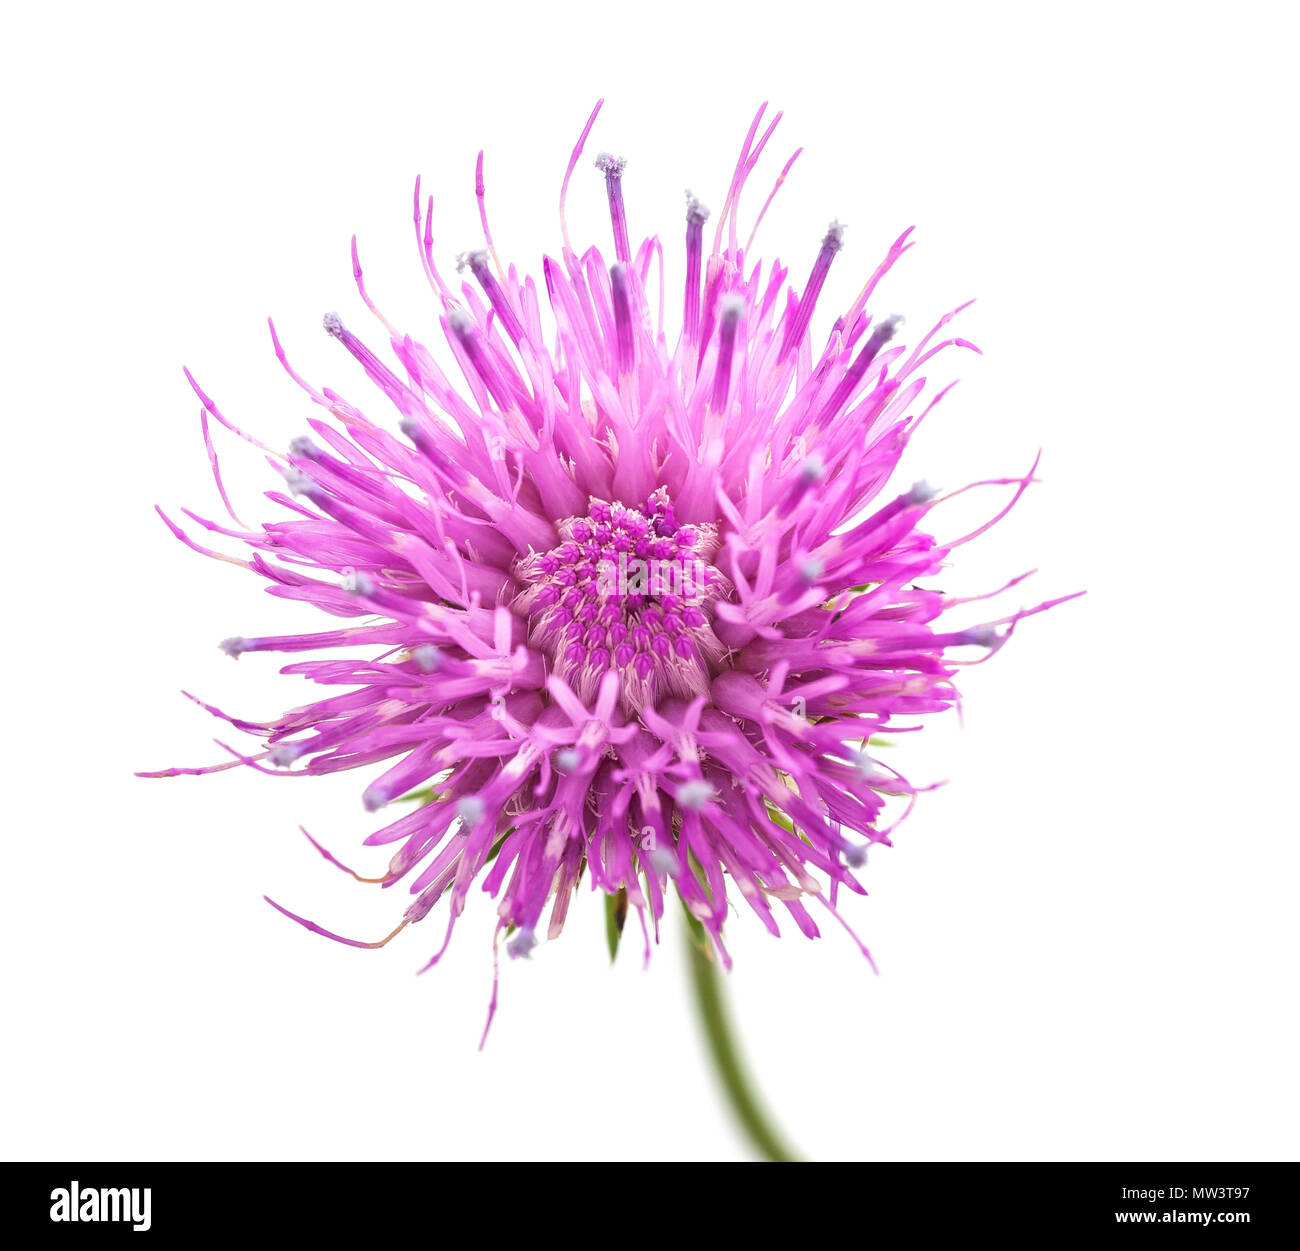 Thistle flower isolated on white background Banque D'Images